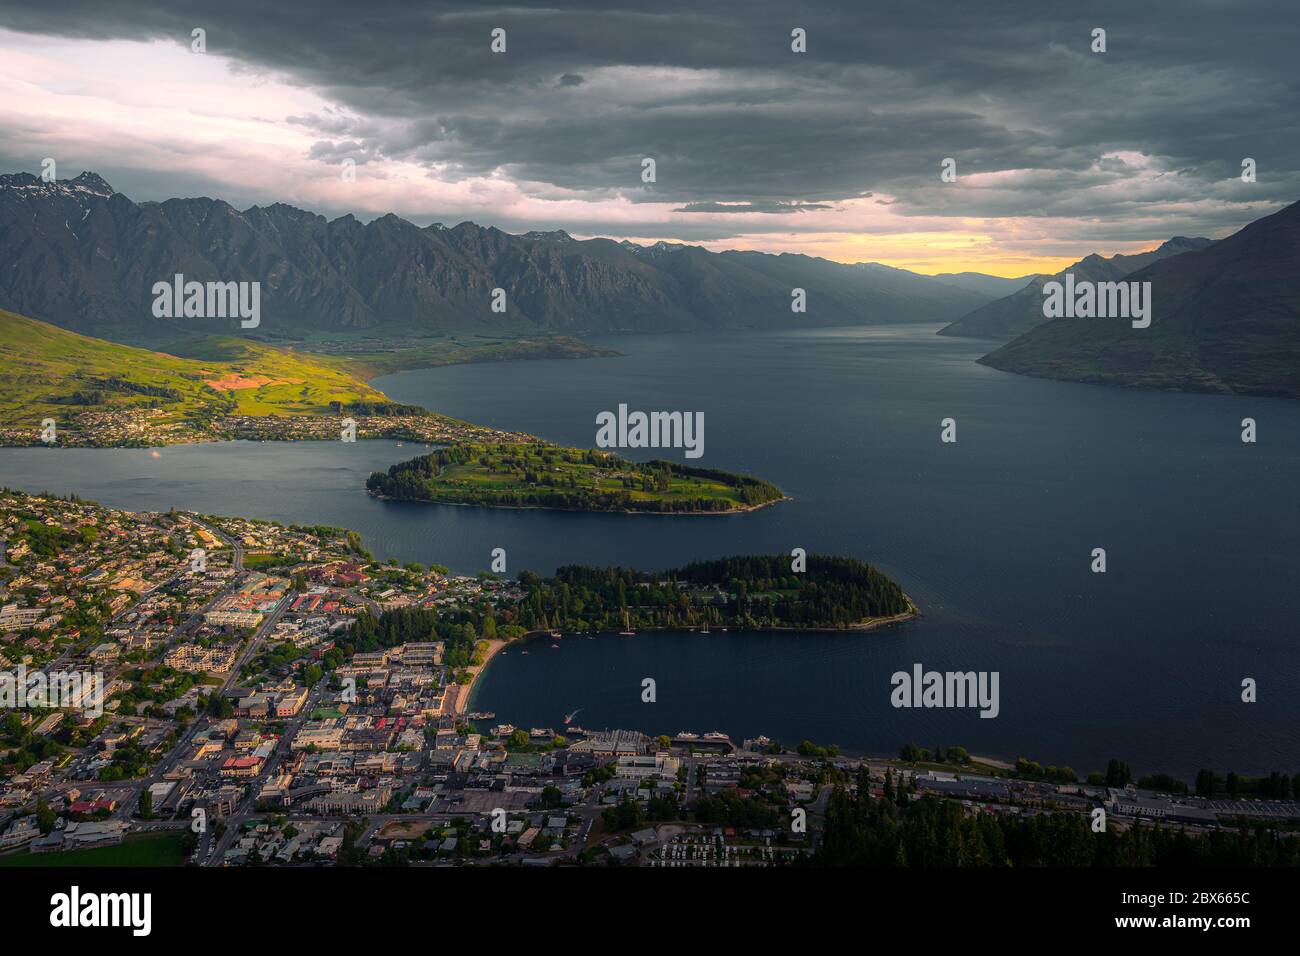 Iconic view of Queenstown from the Skyline at sunset Stock Photo